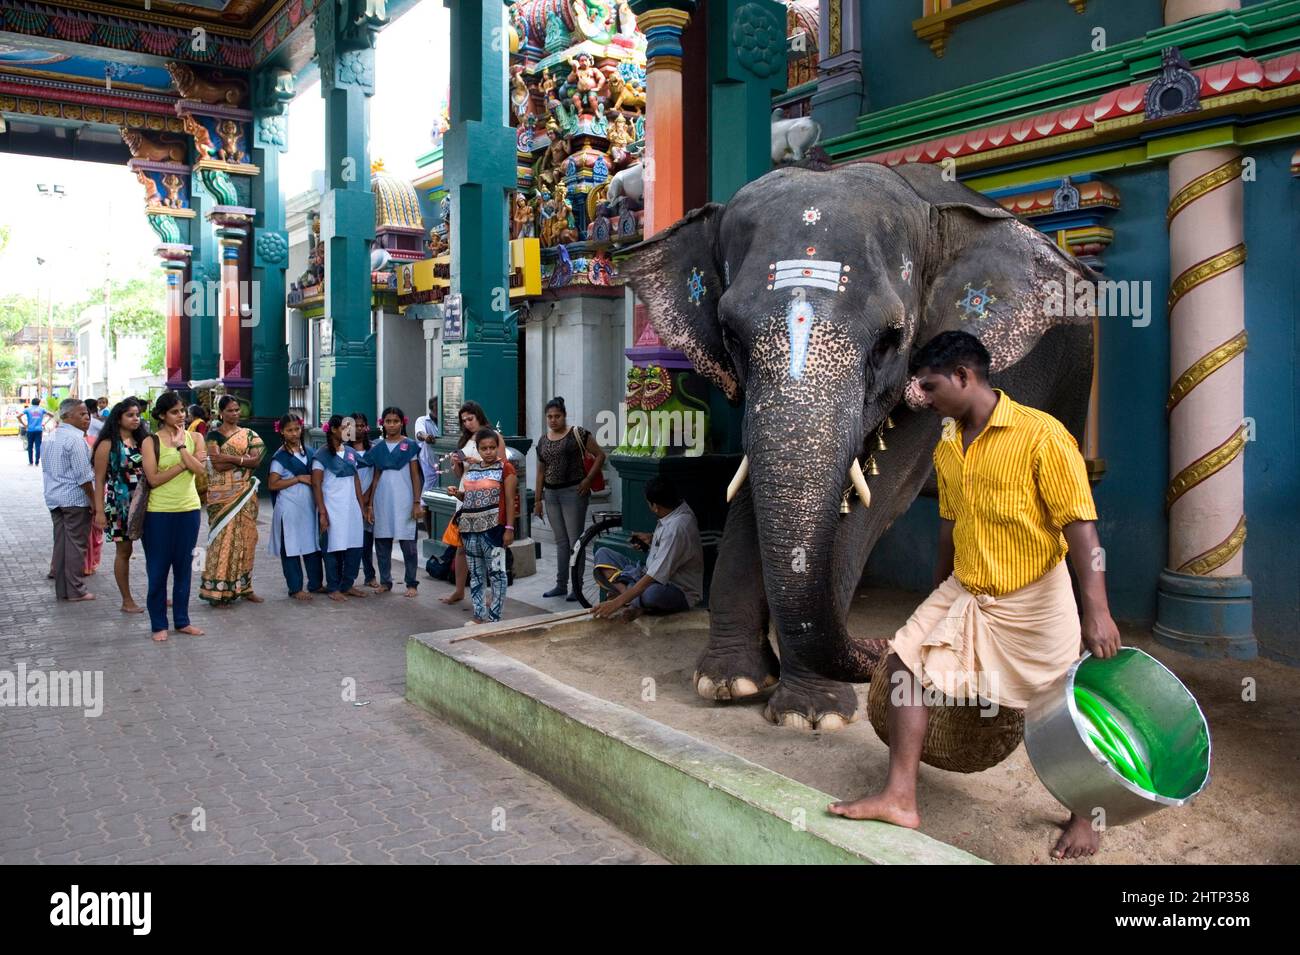 PONDICHERRY, India - July 2016: The elephant Lakshmi at the Manakula Vinayagar Temple in the white town of Pondicherry. She's chained there to bless p Stock Photo